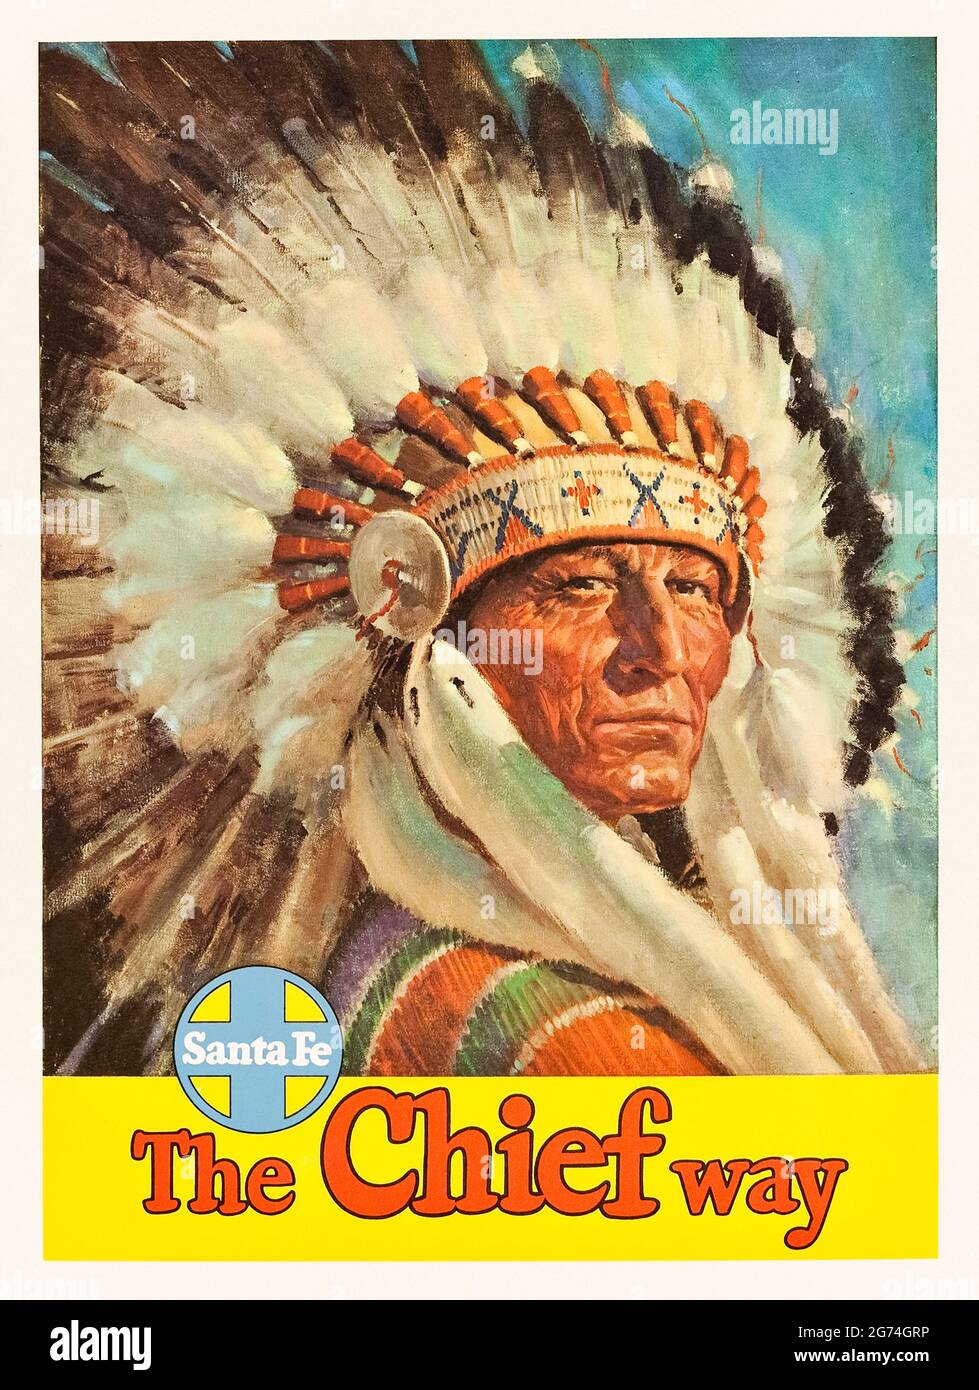 ‘The Chief Way’ 1947 Sante Fe Railroad Travel Poster showing a head and shoulders portrait of a Native American wearing headdress staring directly at the viewer. The Atchison, Topeka and Santa Fe Railway (ATSF) flagship streamliner passenger train between Chicago and Los Angeles was called the ‘Super Chief’, and the name and iconic imagery of this poster are both evocative of the West of America. Credit: Private Collection / AF Fotografie Stock Photo